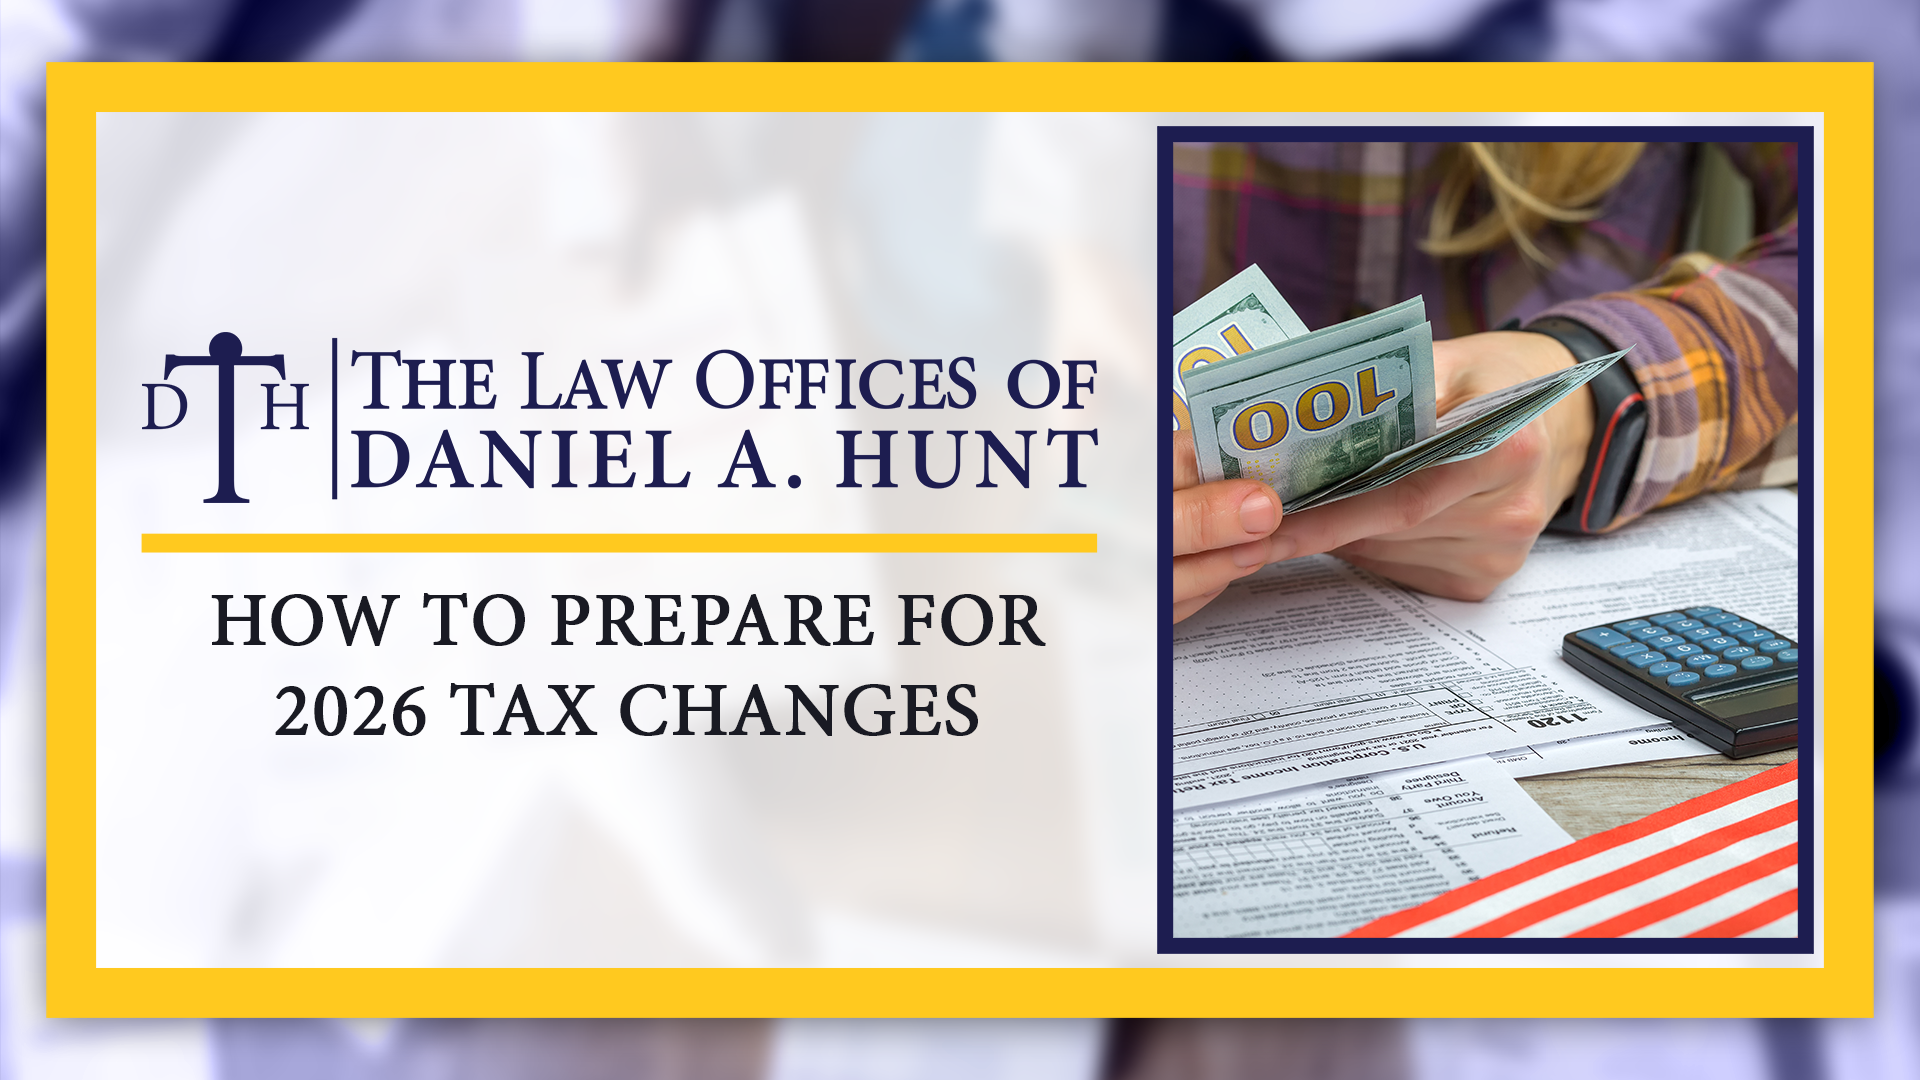 How to Prepare for 2026 Tax Changes